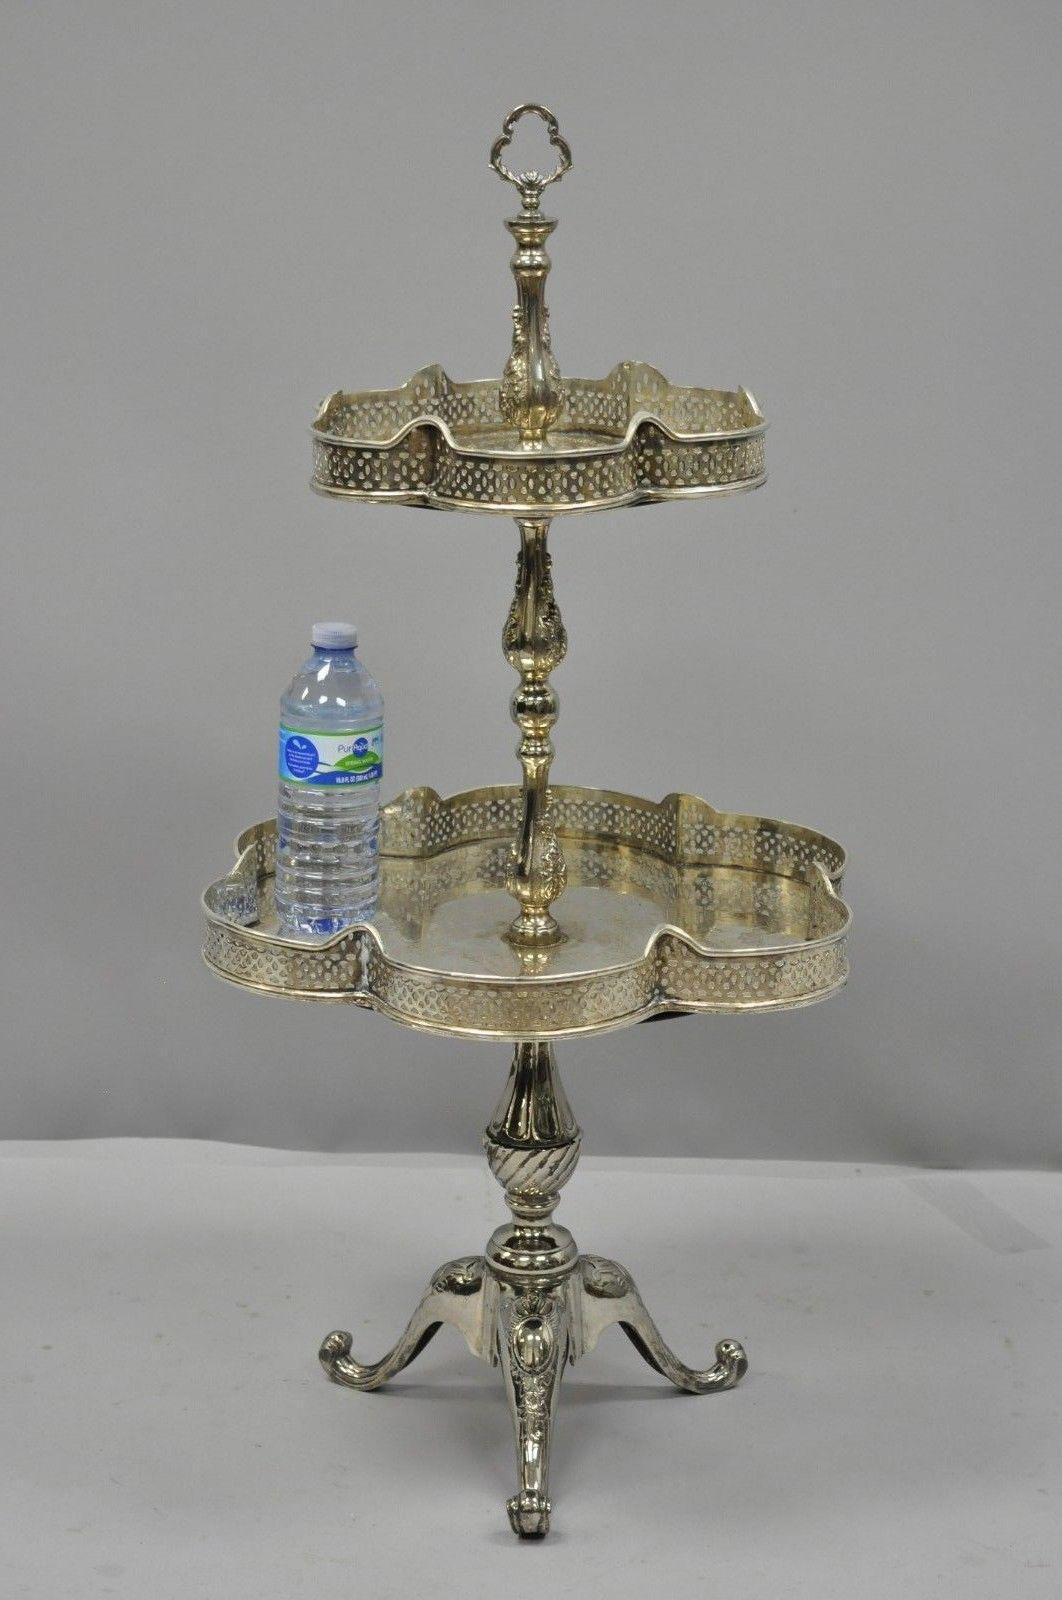 Vintage 2-tier silver plated regency style centerpiece pedestal base stand regency style, circa mid-late 20th century. Measurements: 34